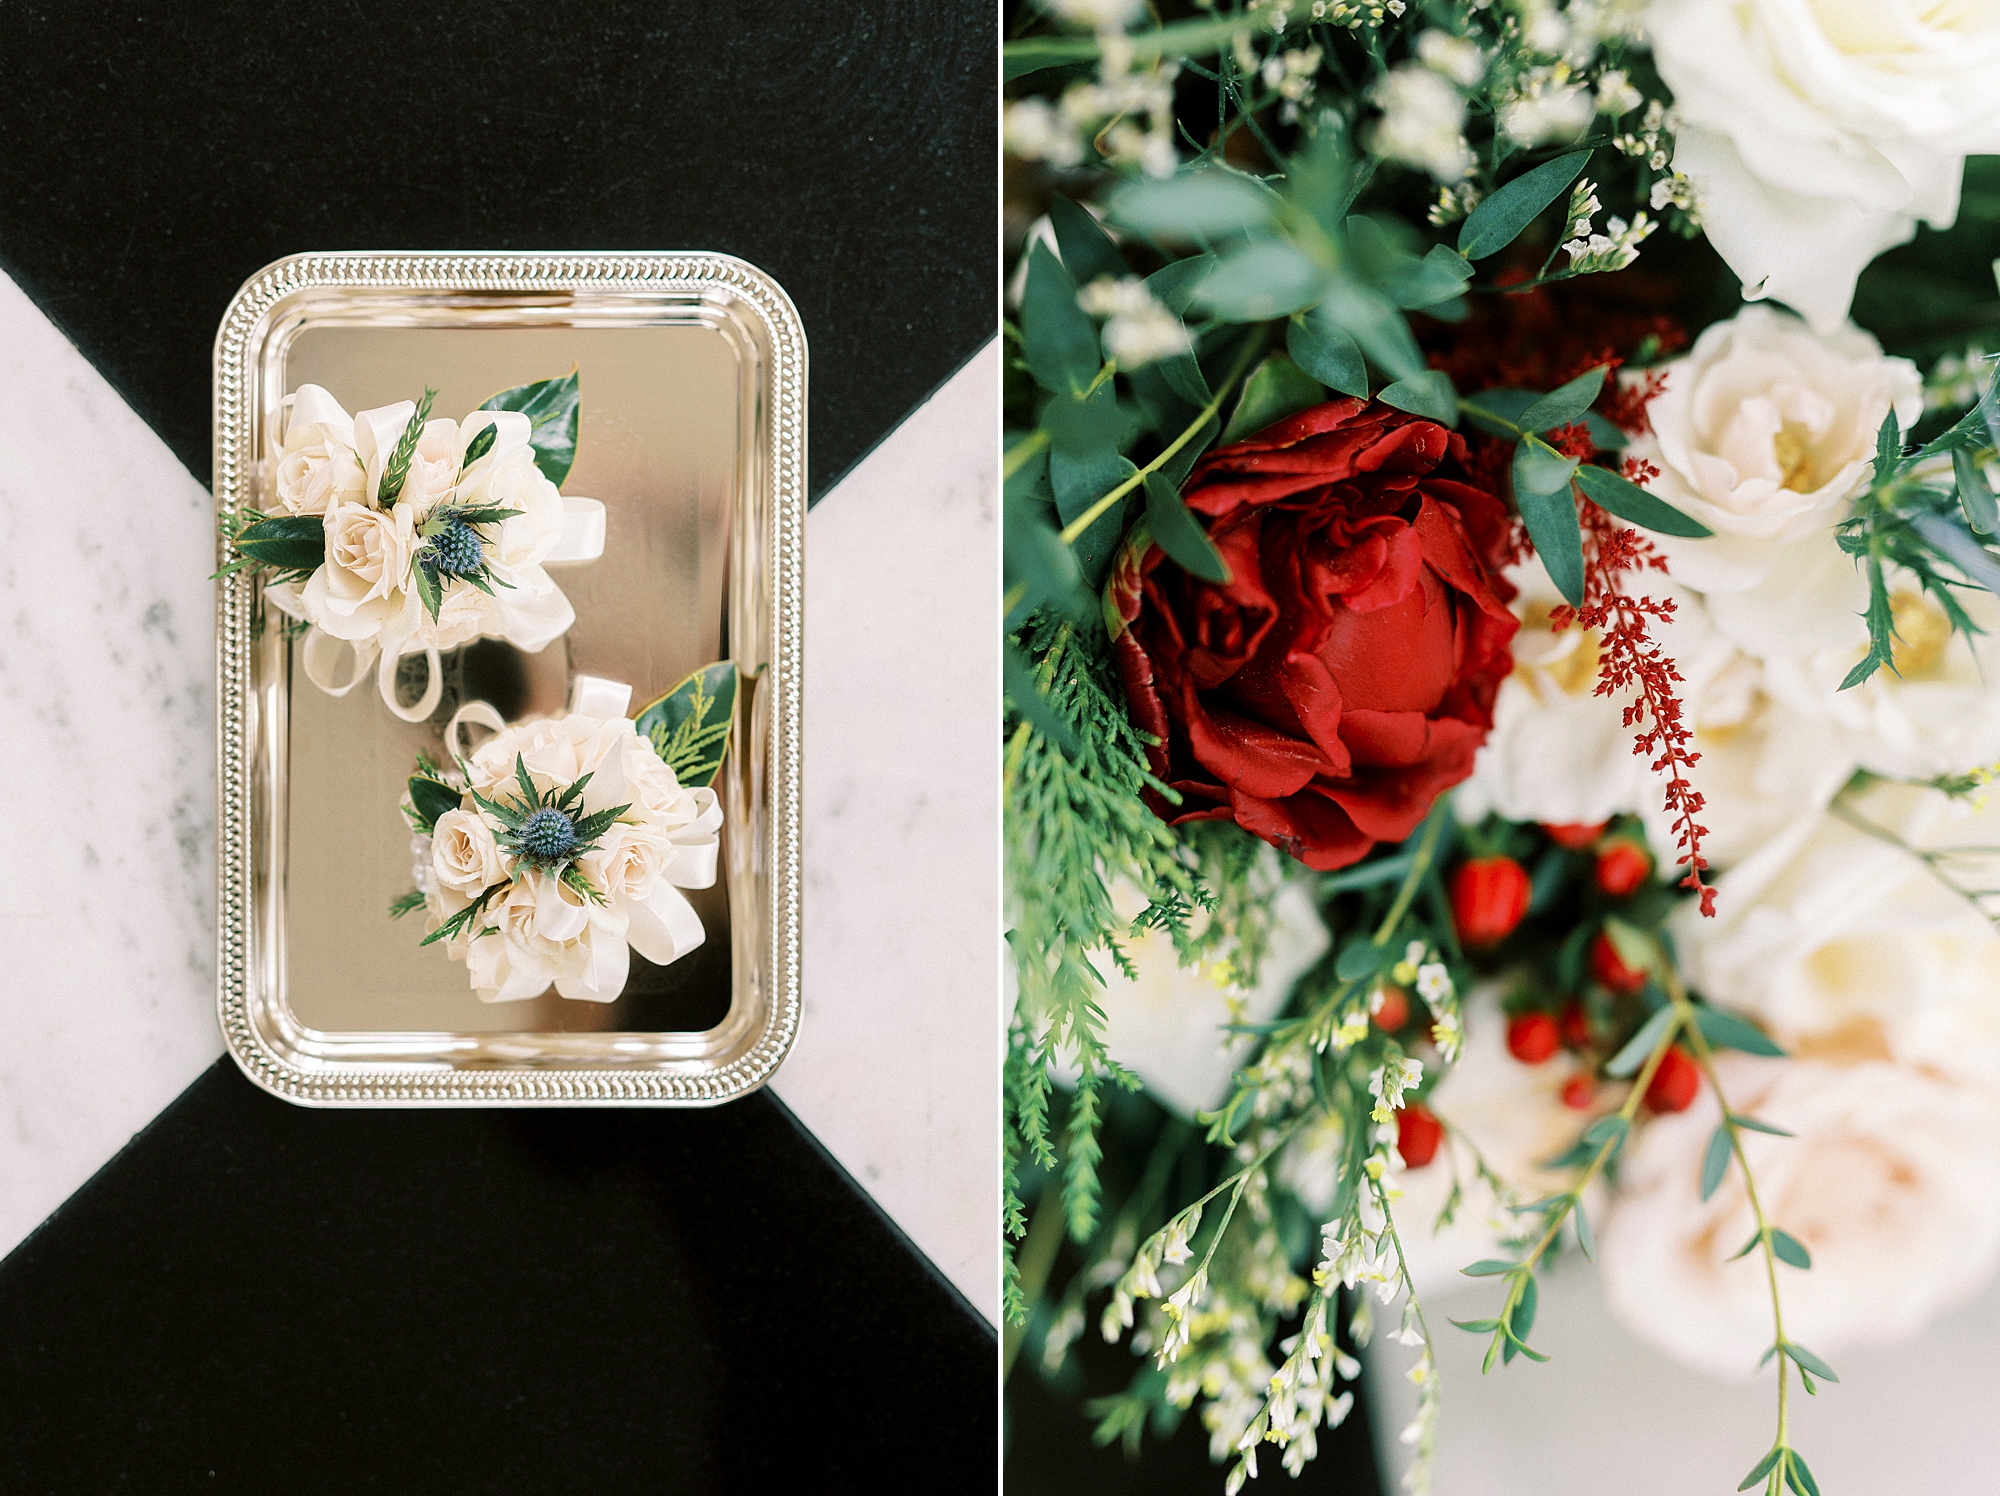 groom's white boutonnière and bride's bouquet with red flowers for classic winter wedding at Separk Mansion 